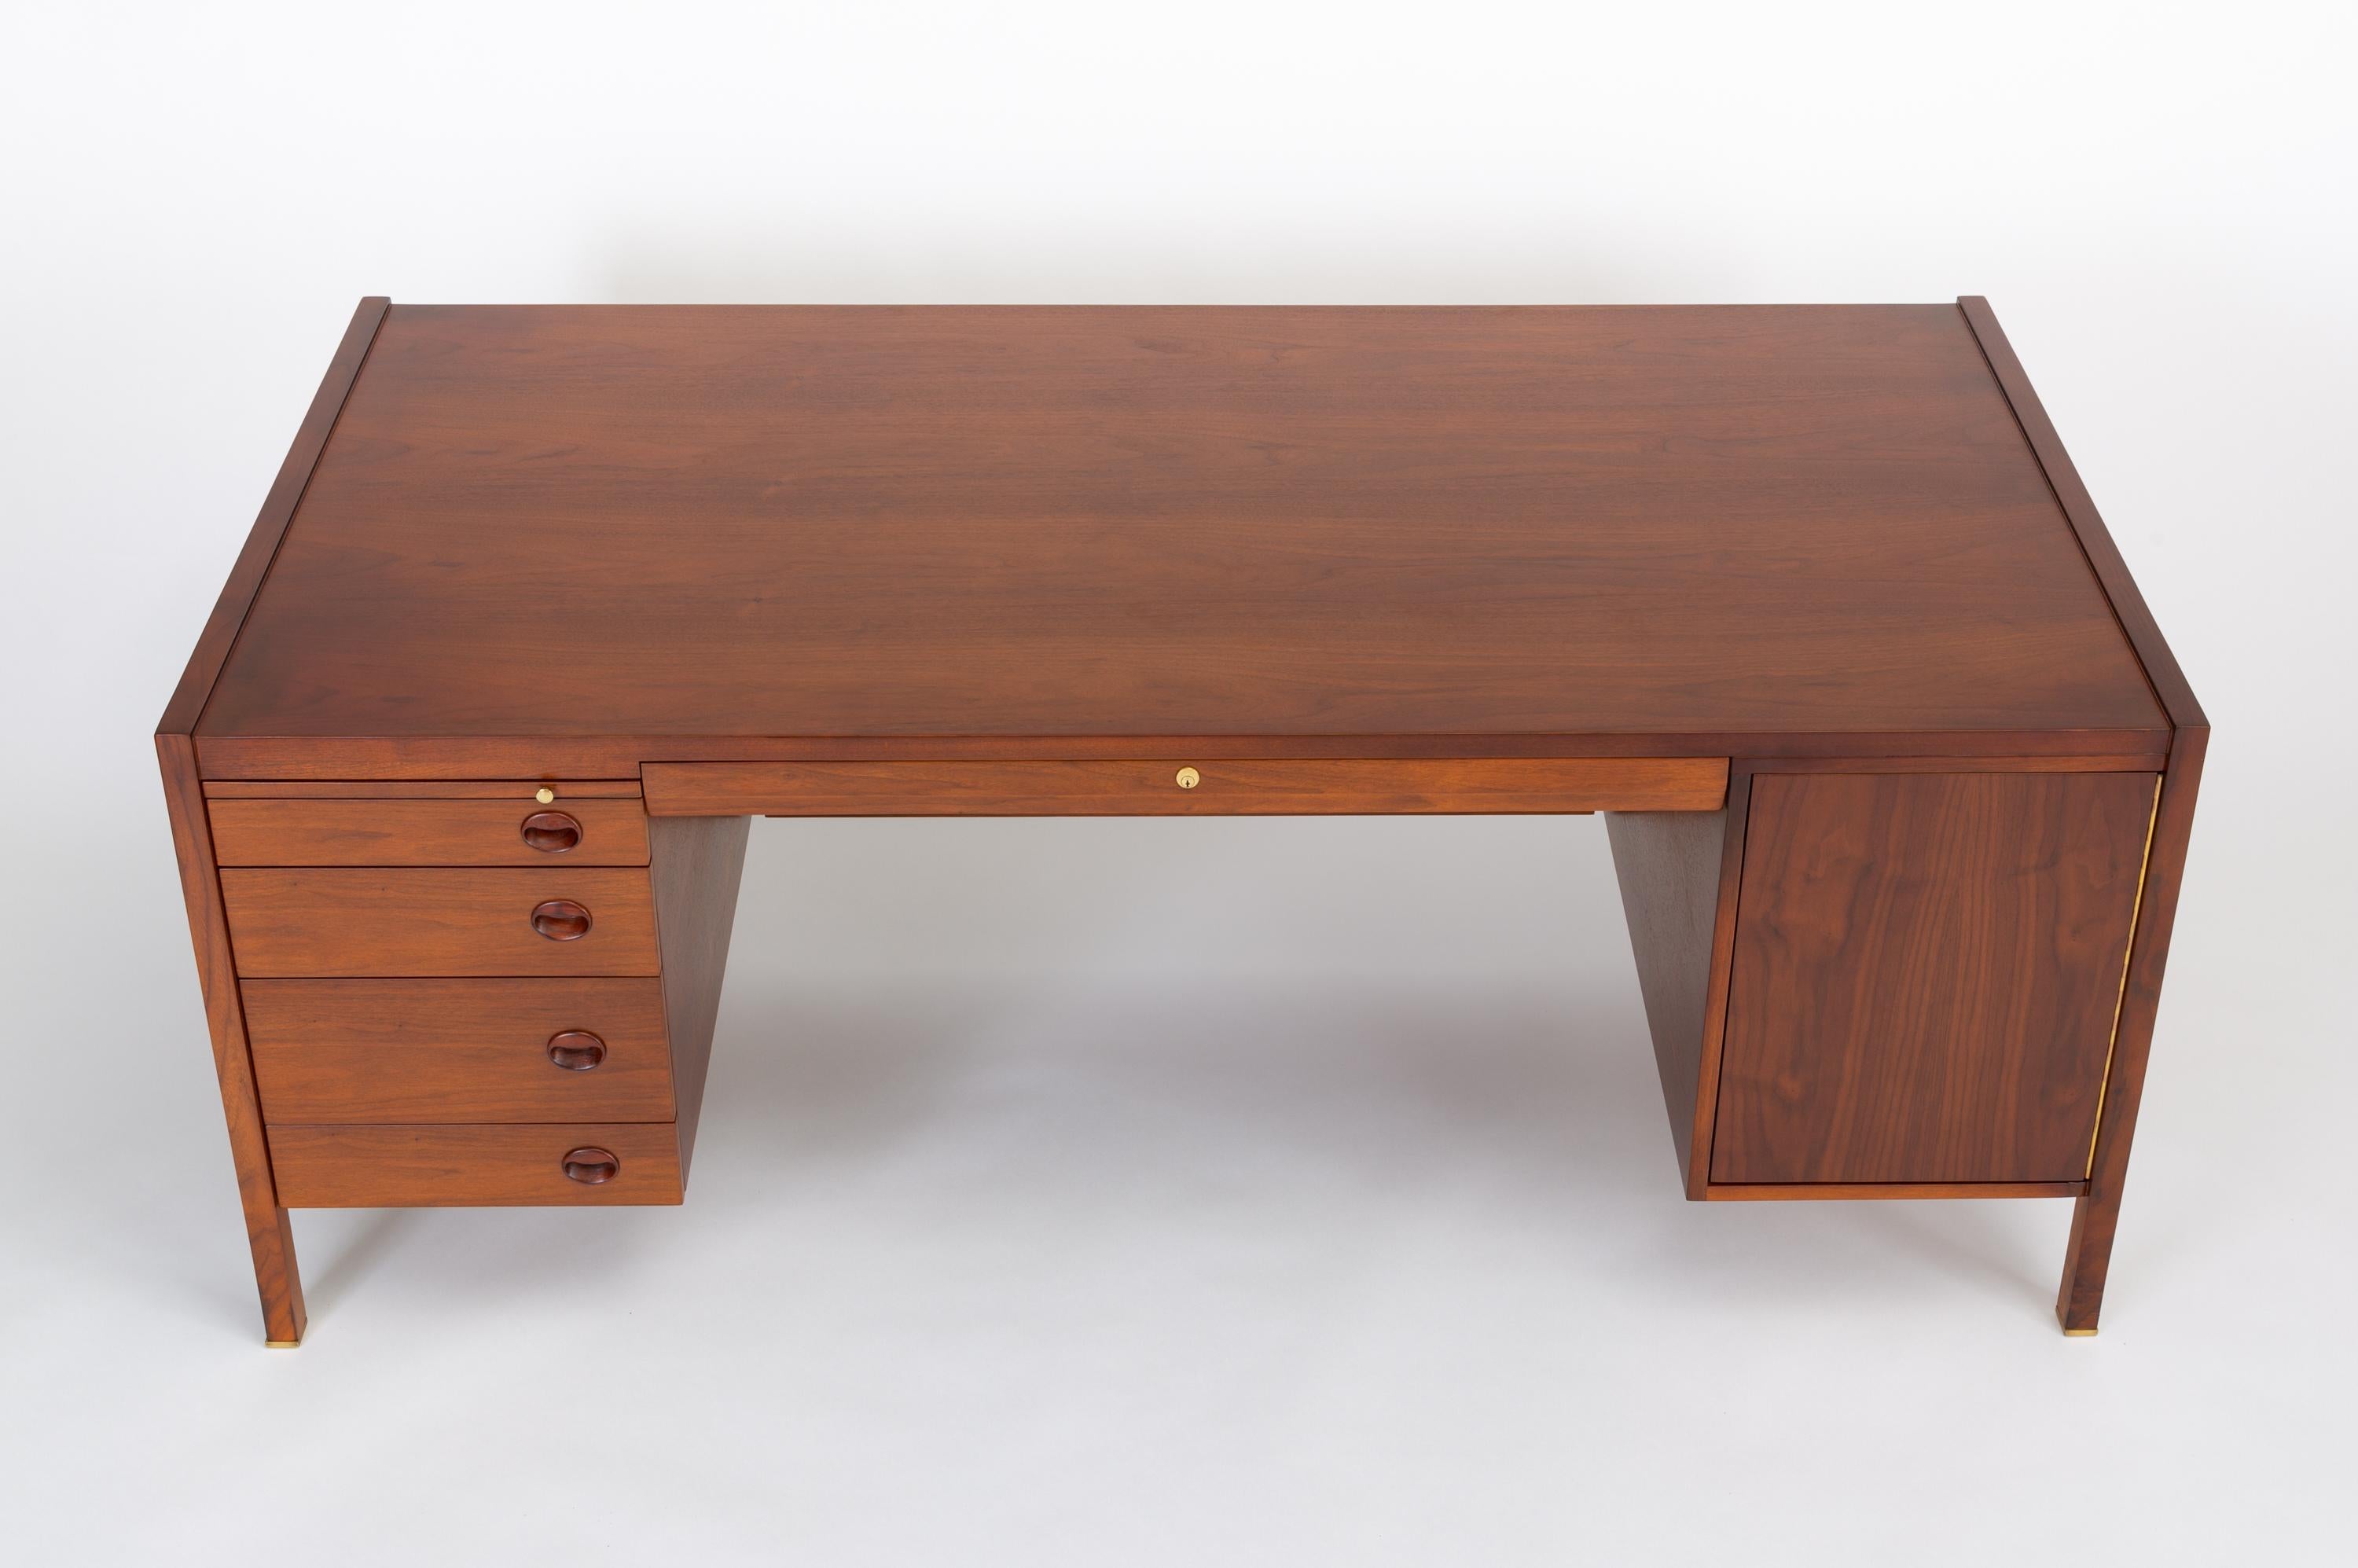 Edward Wormley’s stately Model 807 executive desk for Dunbar Furniture in walnut, with rosewood and brass details. The office Dunbar executive desk was a highly customizable design with four post legs and an inset modesty panel suspended between